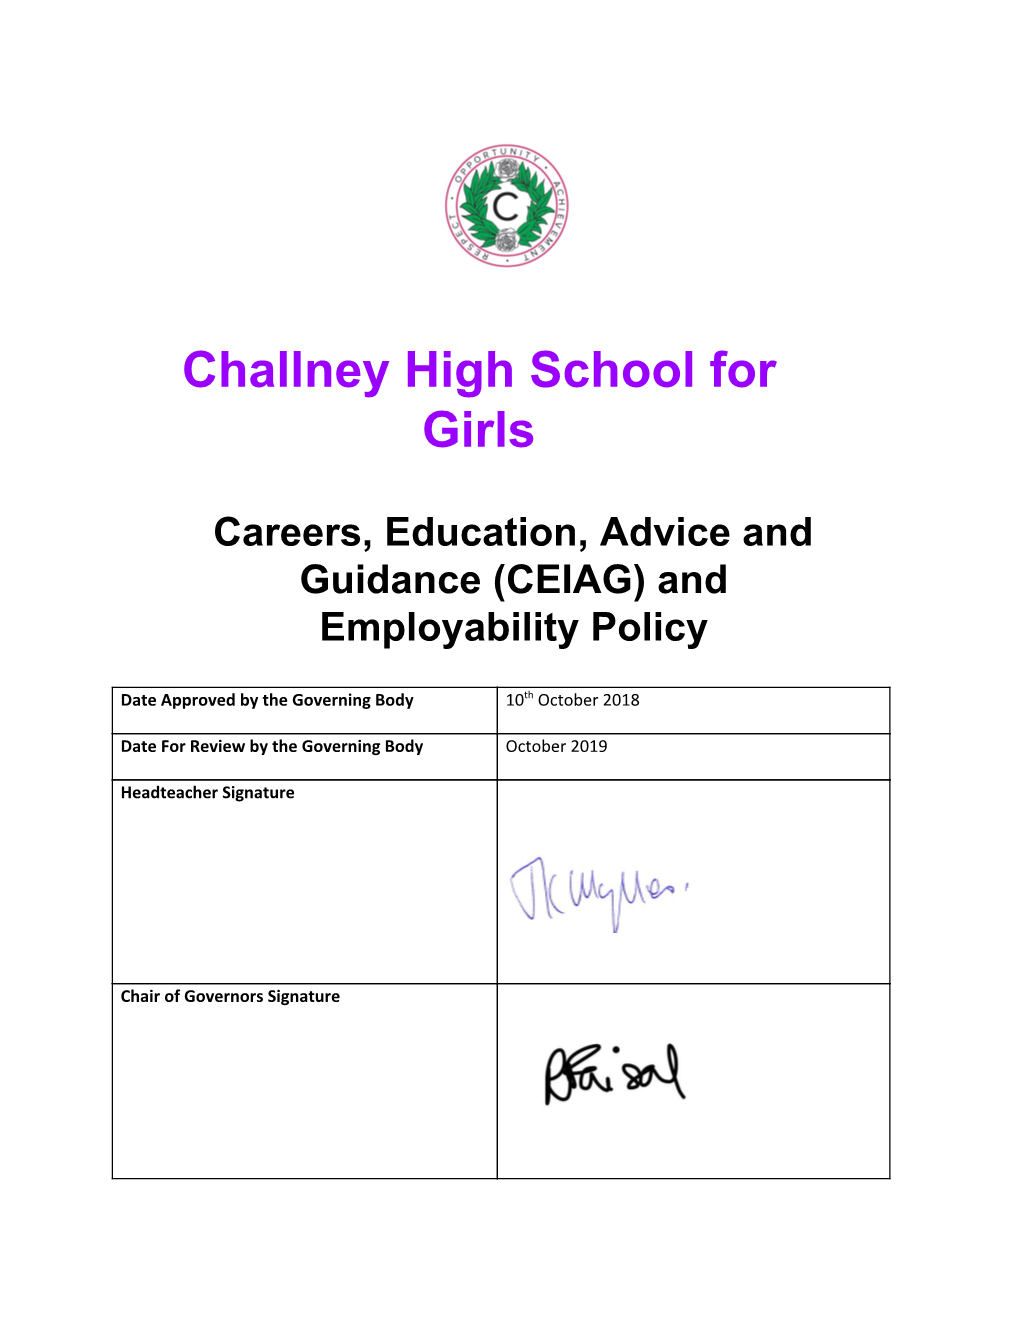 CEIAG) and Employability Policy